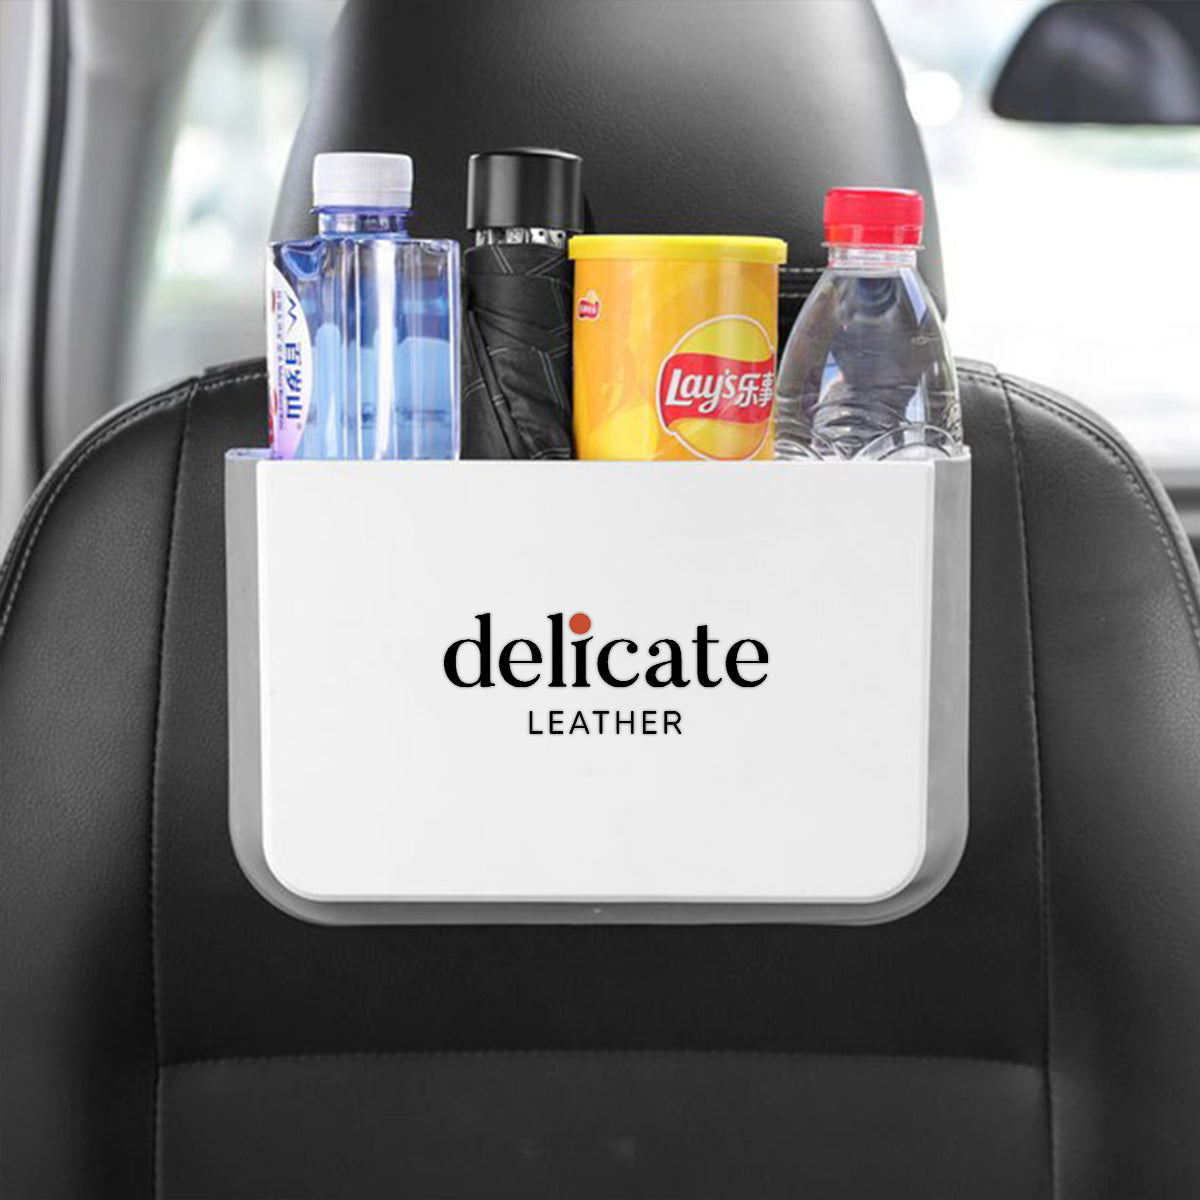 Hanging Waterproof Car Trash can-Foldable, Custom For Your Cars, Waterproof, and Equipped with Cup Holders and Trays. Multi-Purpose, Car Accessories UE11992 - Delicate Leather